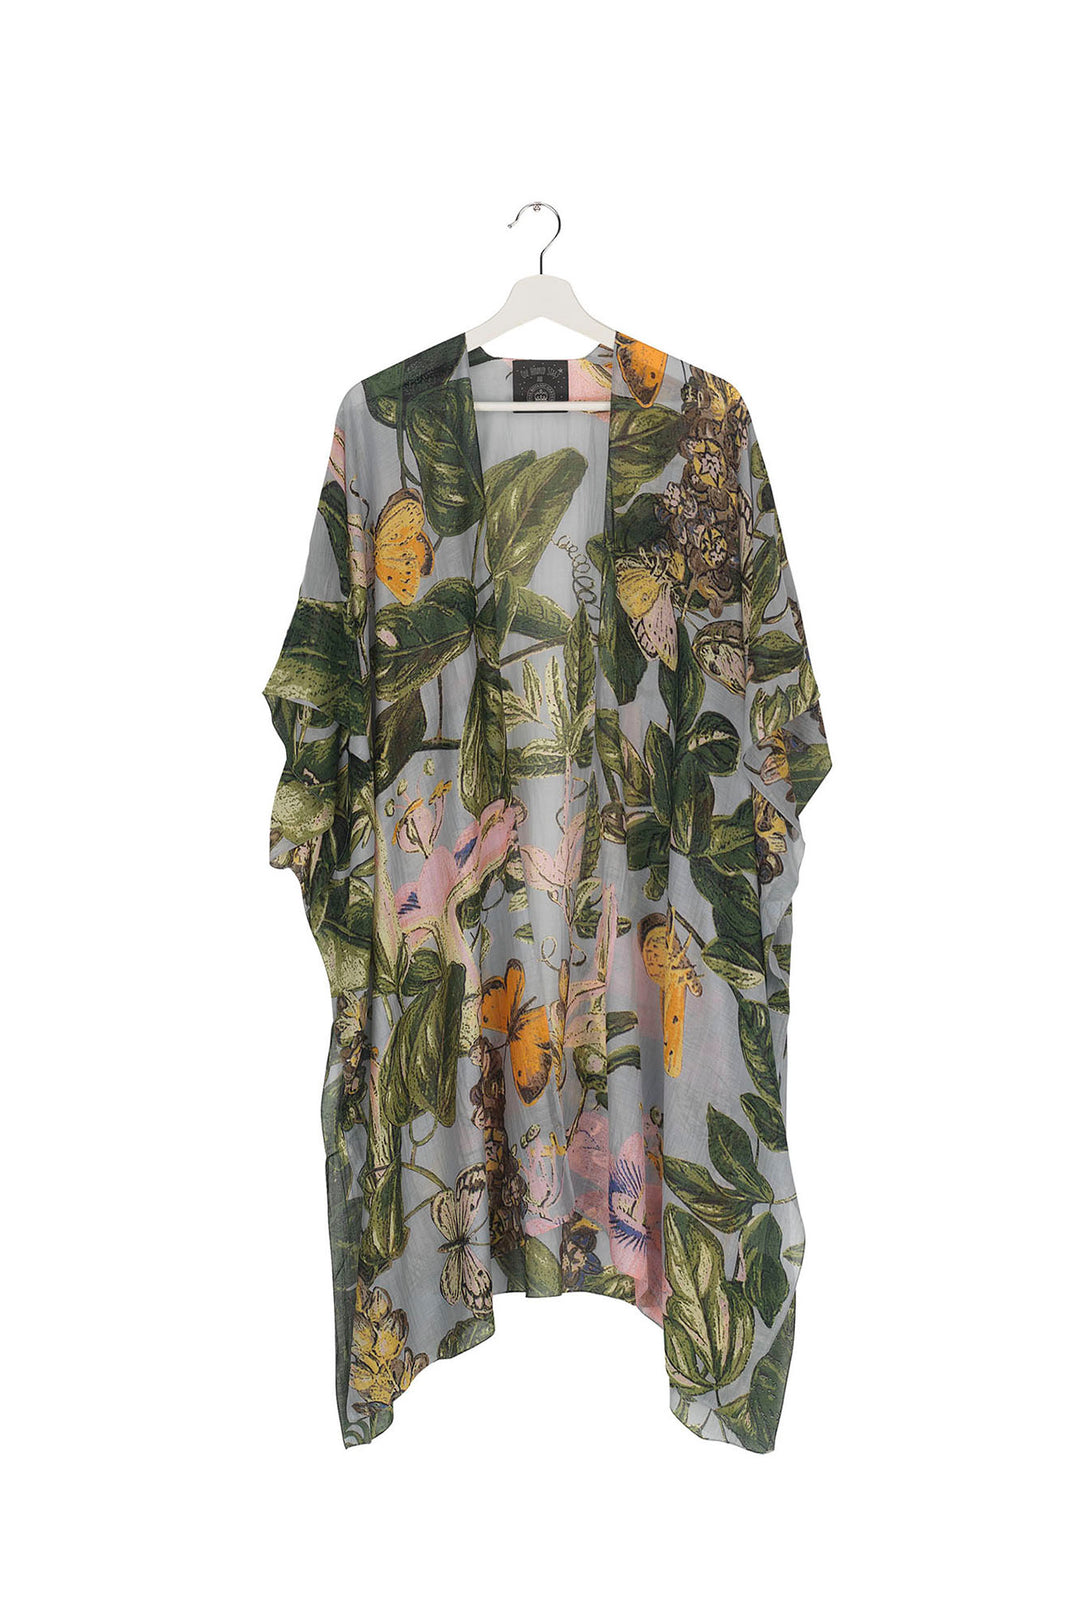 Marianne North Chilli Plant Throwover- These lightweight throwovers make the perfect cover up, they are mid-length with an open front and loose arms, perfect for the warmer months or worn on holiday as the ideal resort wear. 